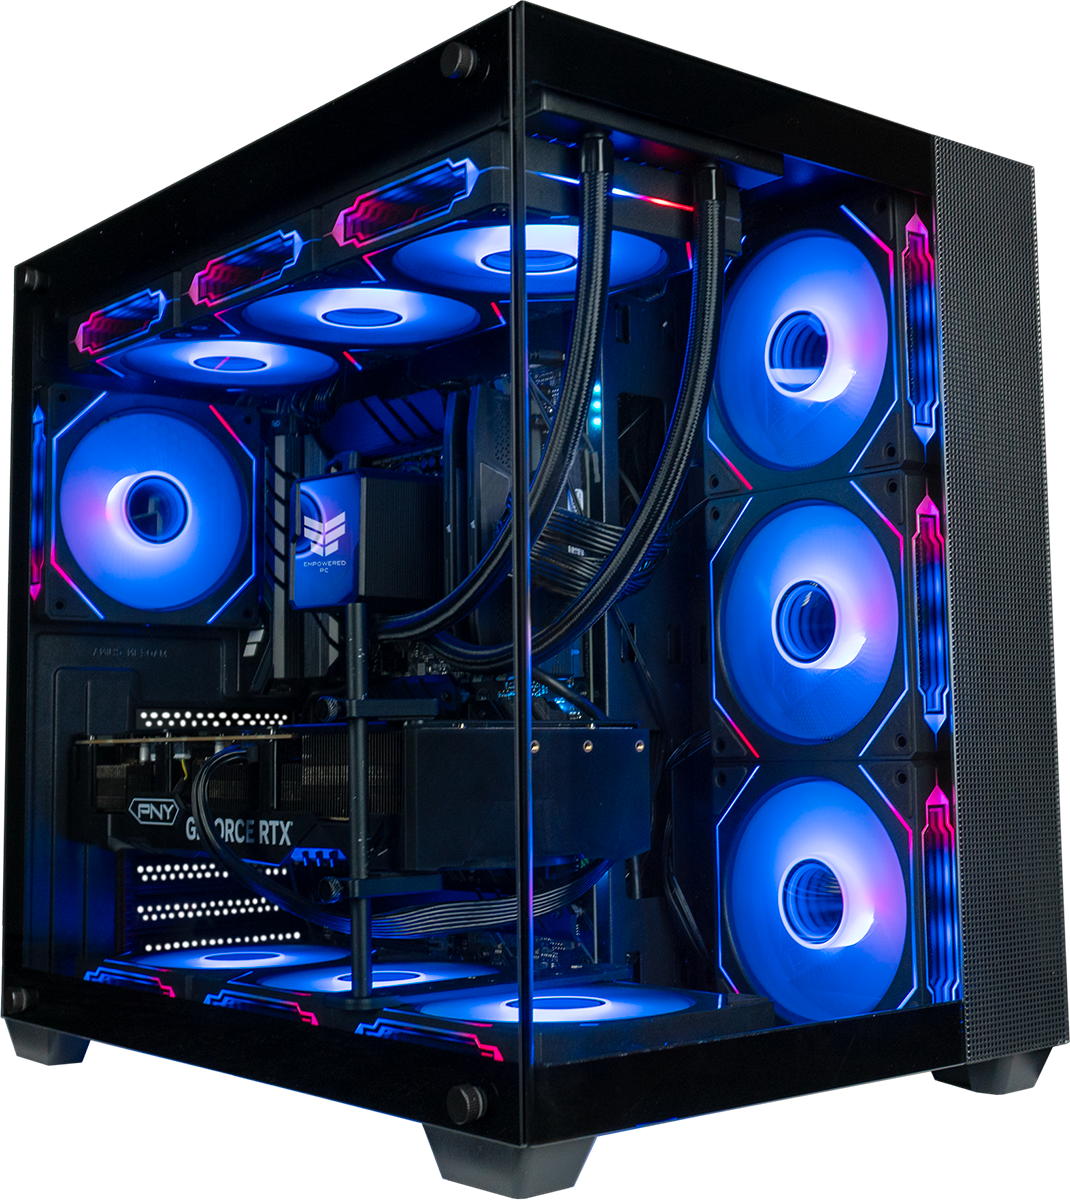 The Panorama tower computers by Empowered PC perform like gaming pc builds from ABS PC to Asus gaming PC with RTX 4080 Ti